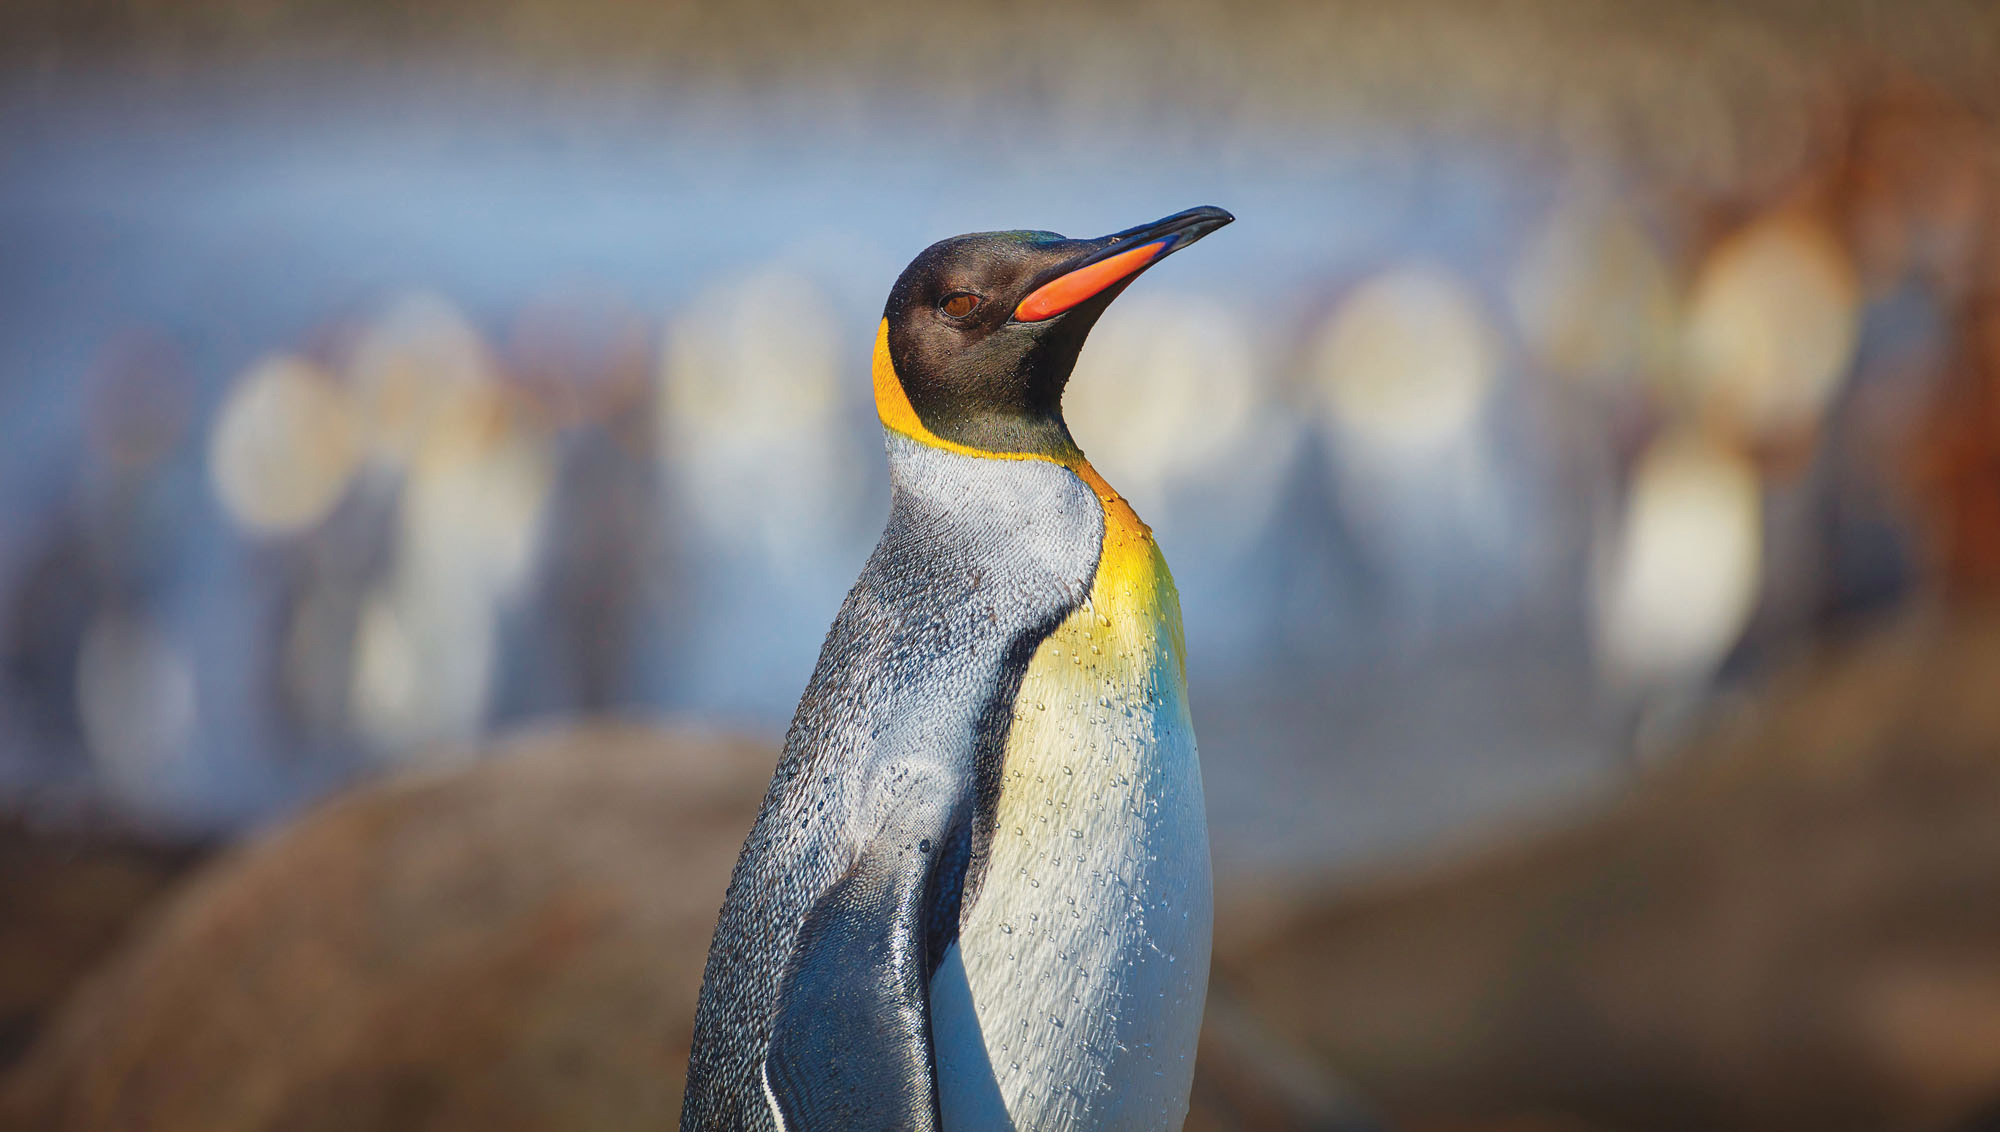 King Penguin, Gold Harbour, South Georgia. Canon EOS 1DX, 200-400mm @ 400mm, f4.5 @ 1/2000 second, ISO 100